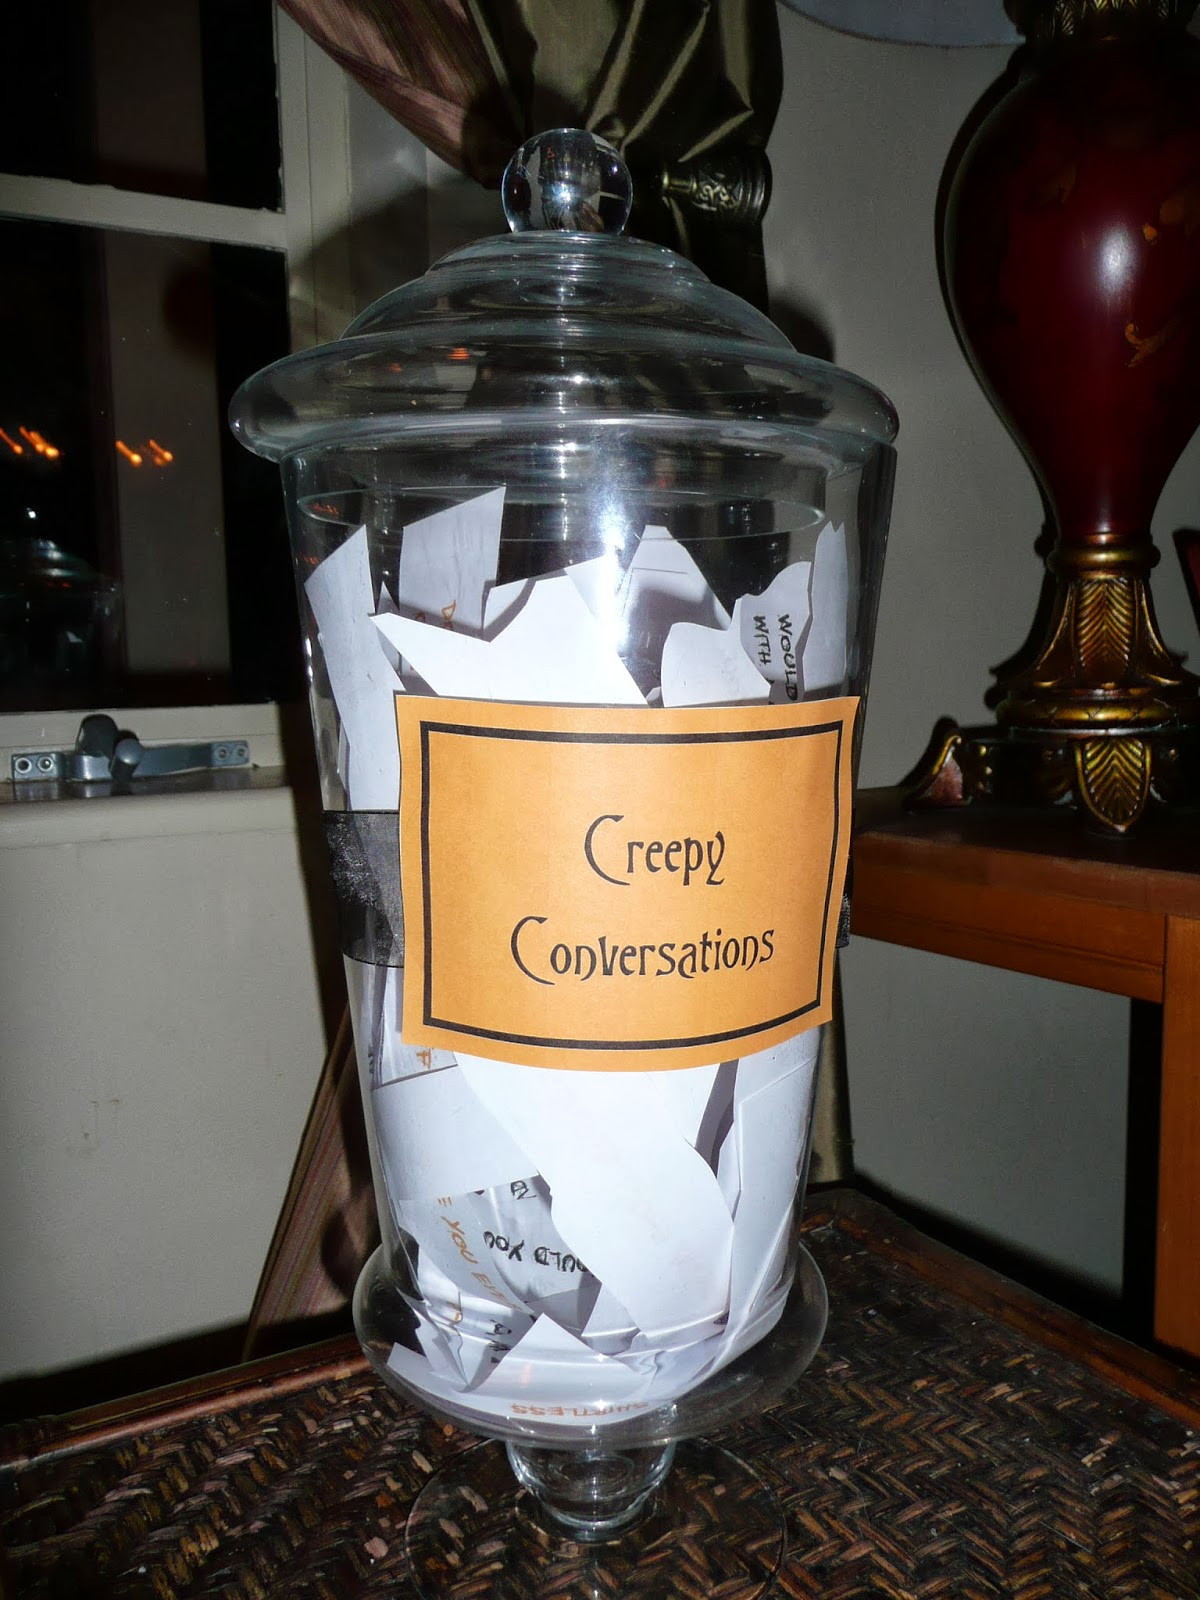 Creepy Halloween Party Ideas
 A Silly Whim "Creepy Conversations" Halloween Game